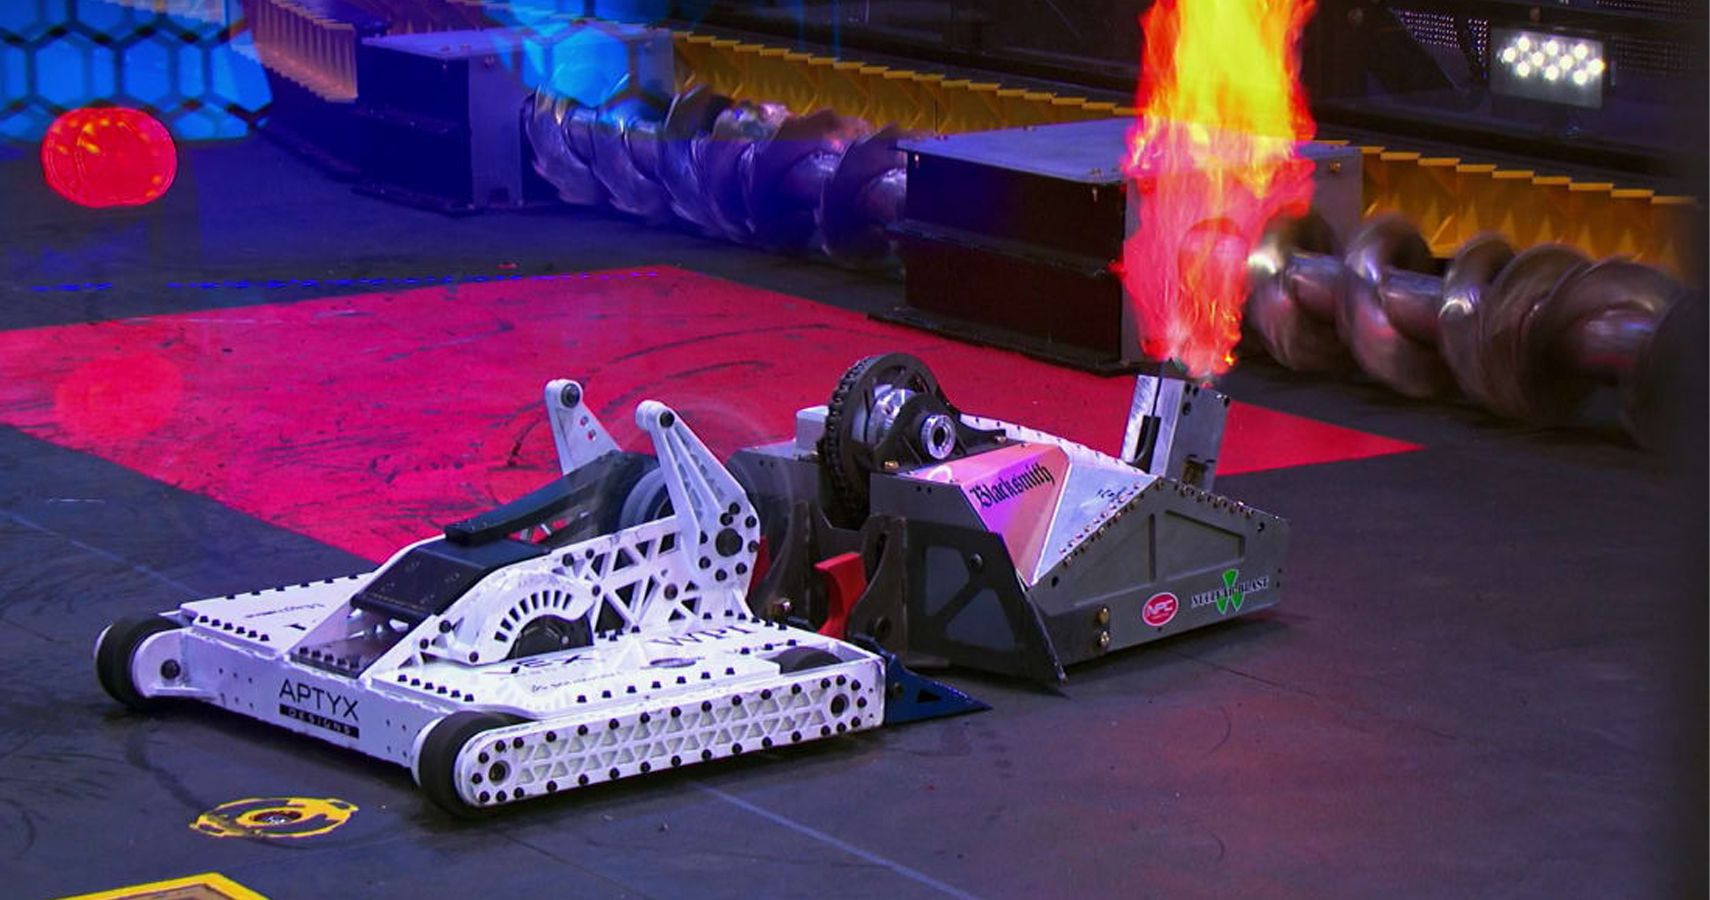 Battlebots 5 Of The Best Bots In The Competition (And 5 That Have Had A